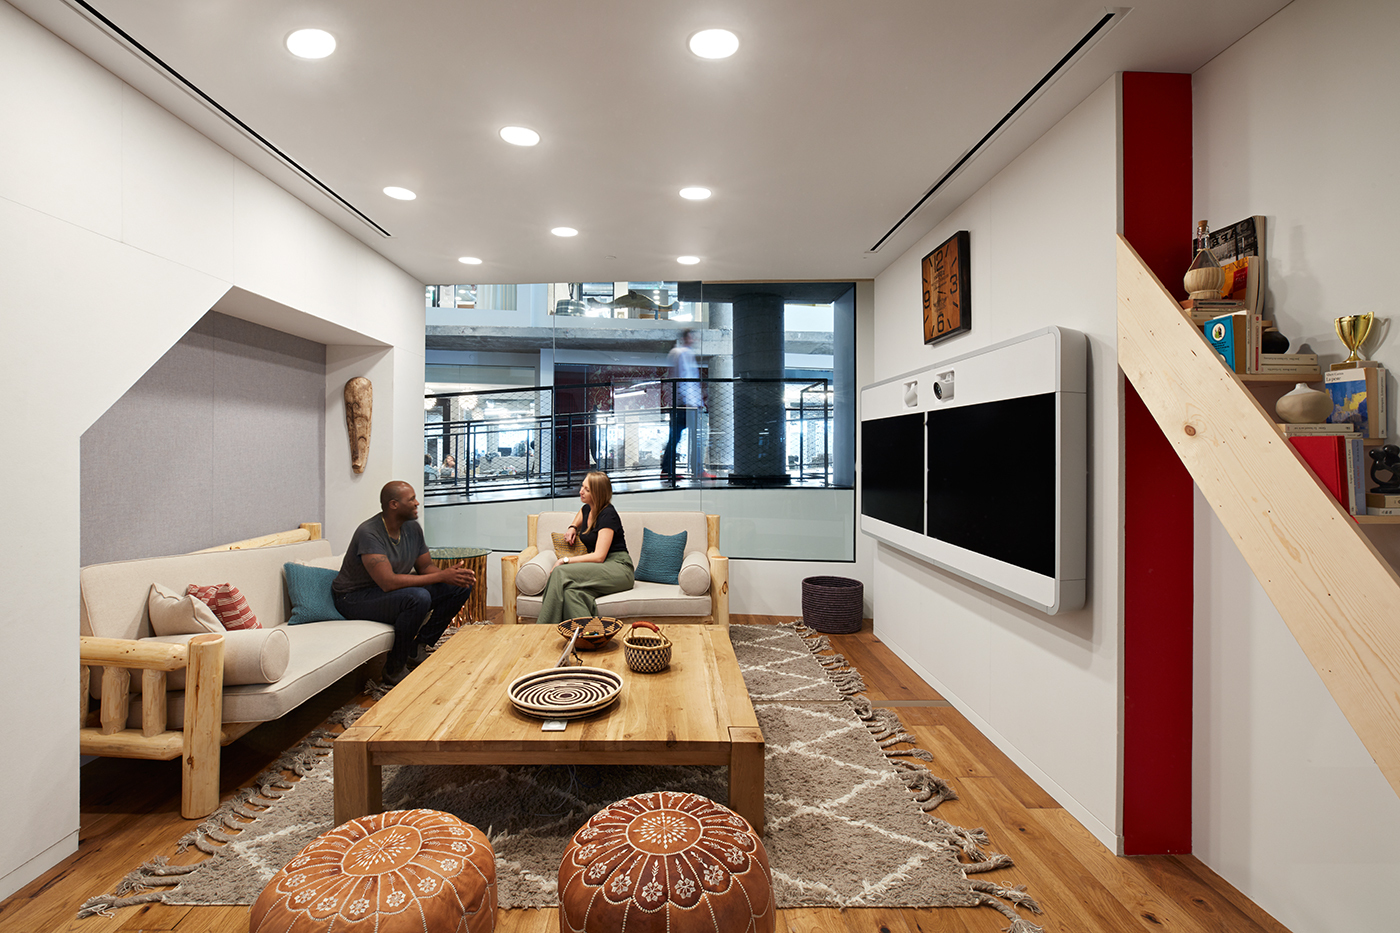 Airbnb's office design at San Francisco HQ 